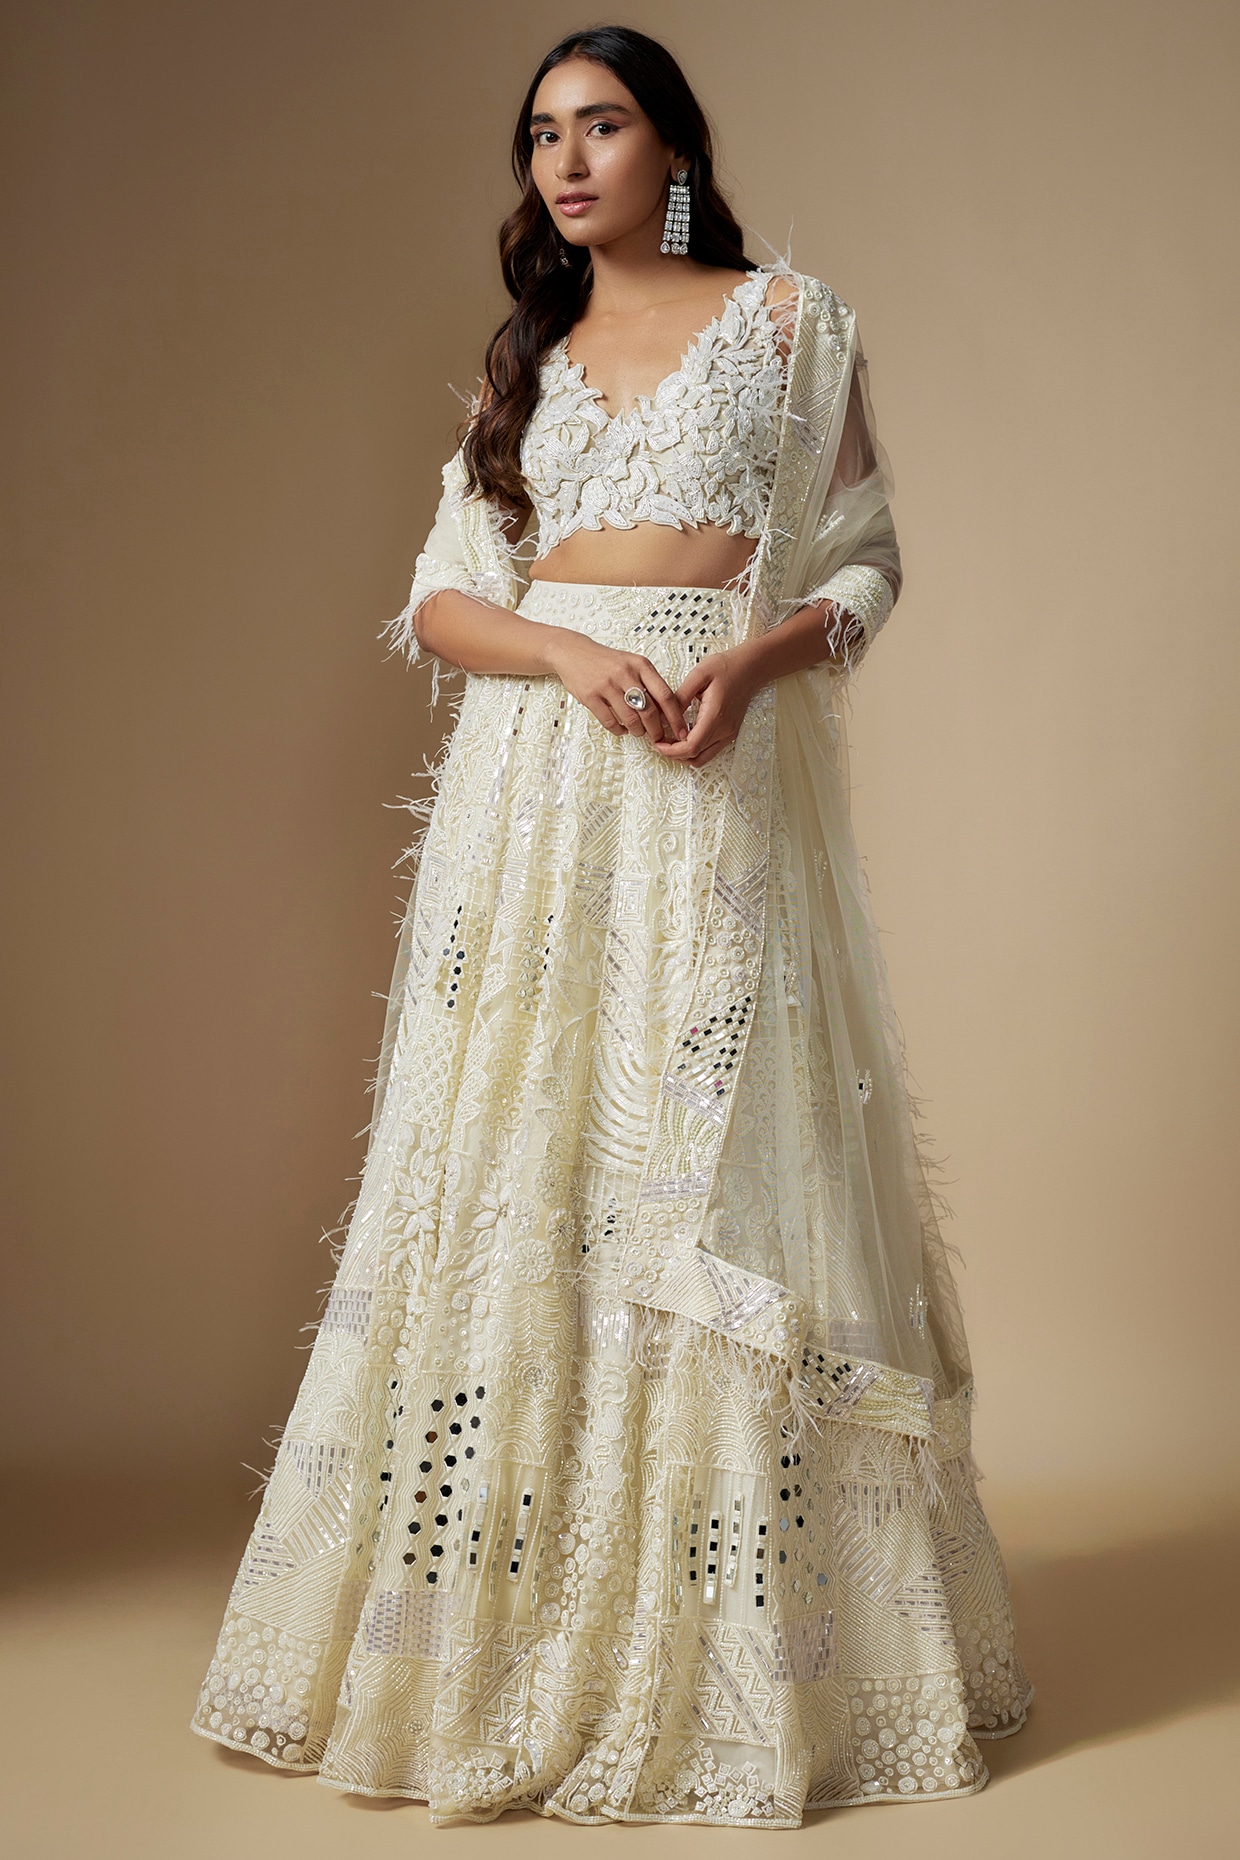 The White Bride By Alizeh Designer Lehenga Choli at Rs 6230 in Surat | ID:  23276043162